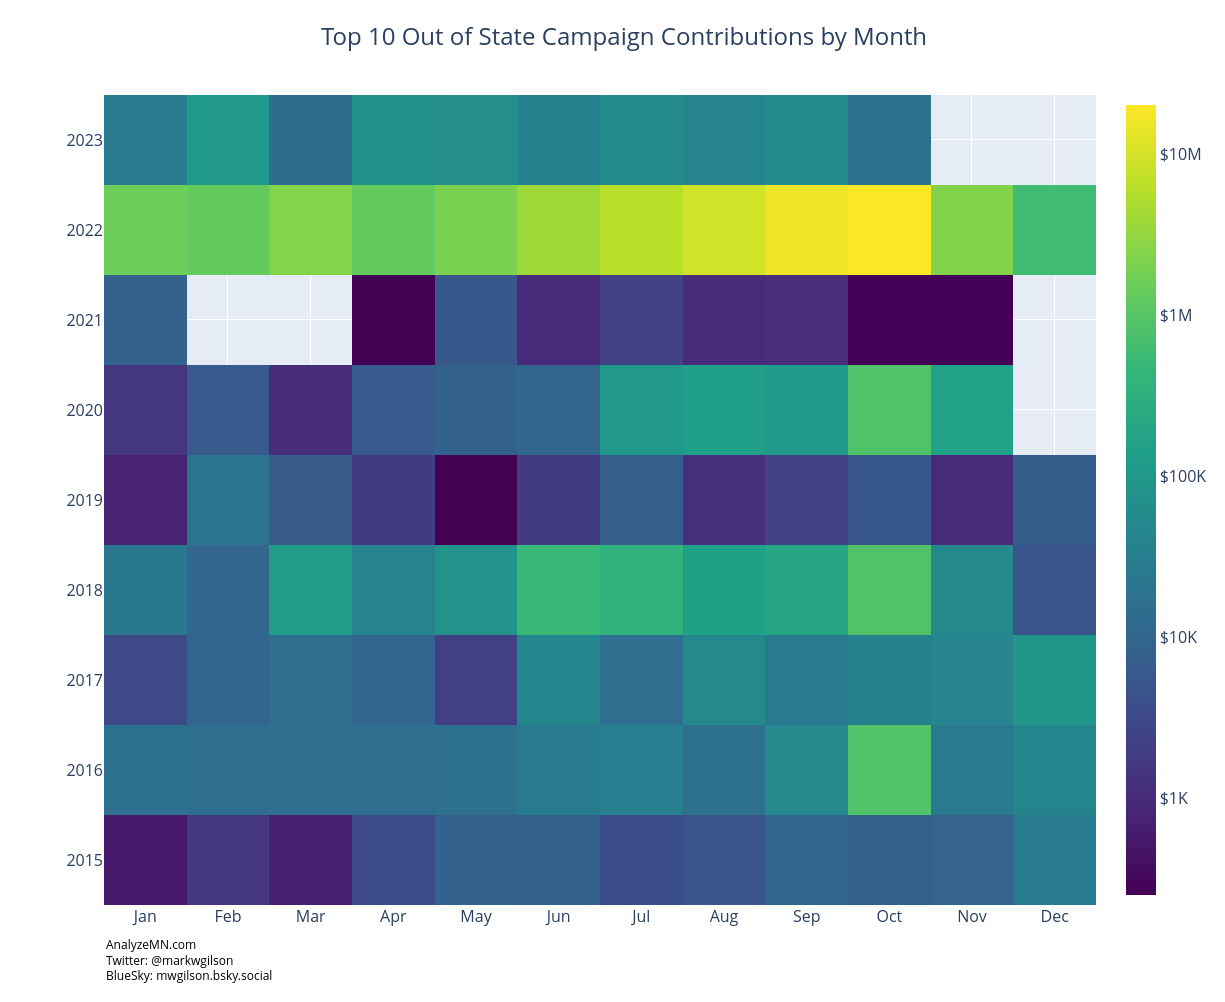 Visualizing Out-of-State Campaign Contributions